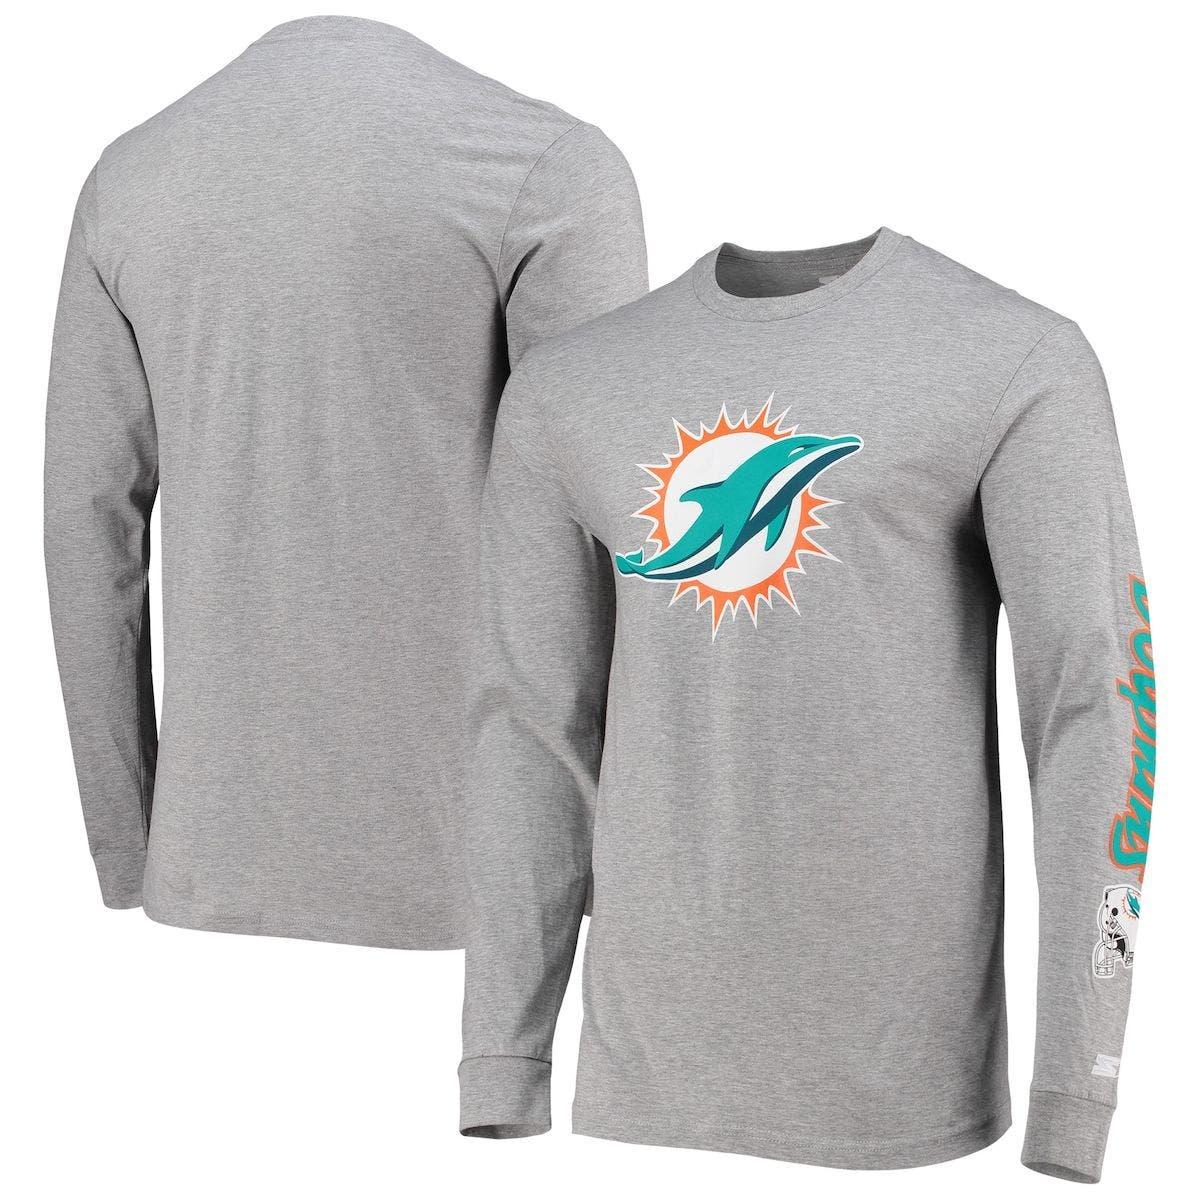 Starter Heathered Gray Miami Dolphins Halftime Long Sleeve T-shirt for Men